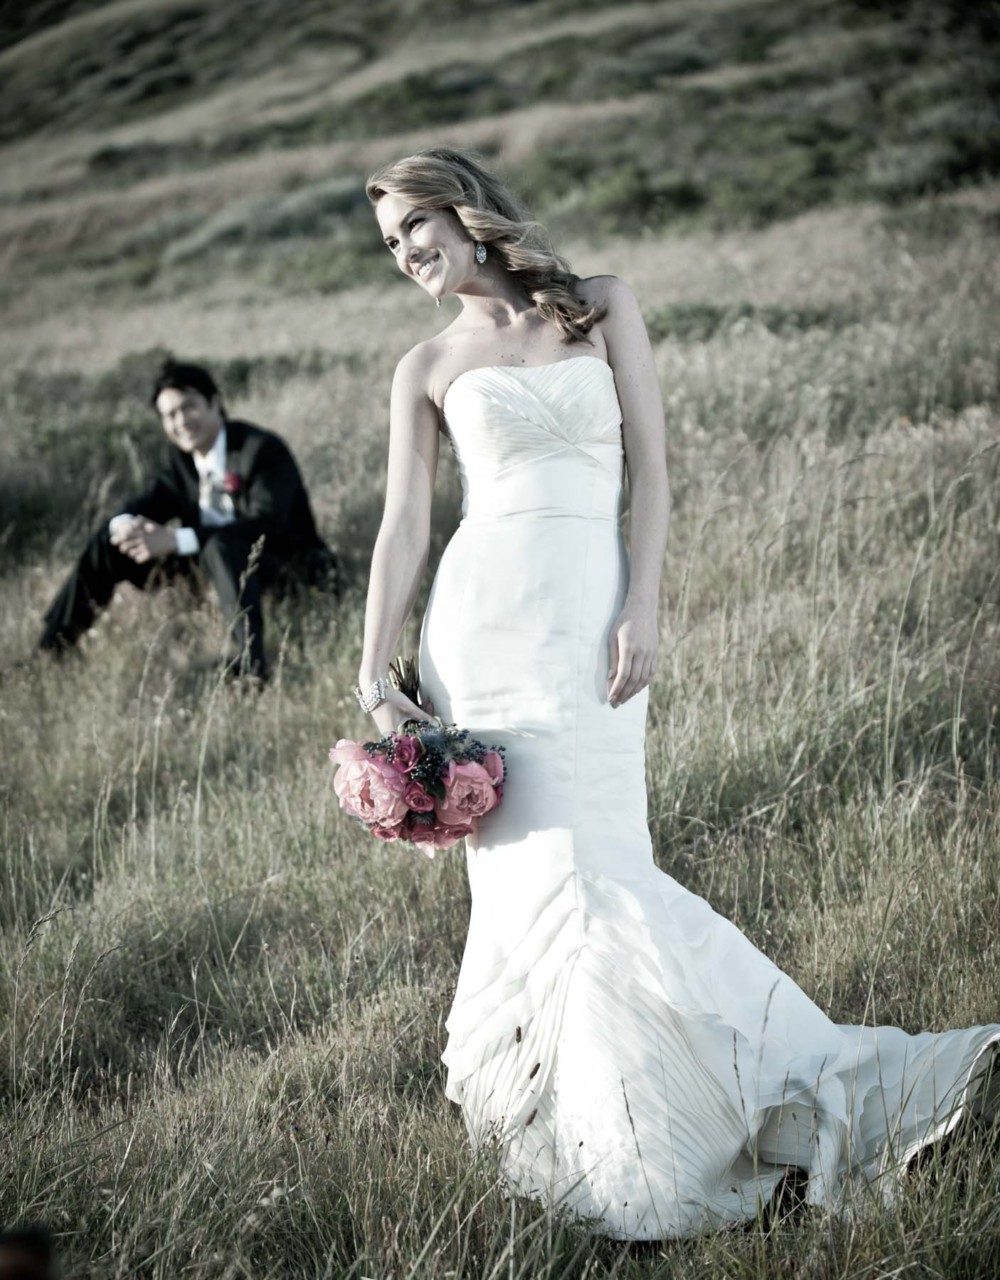 Looking for a fall wedding photographer in Big Lake?